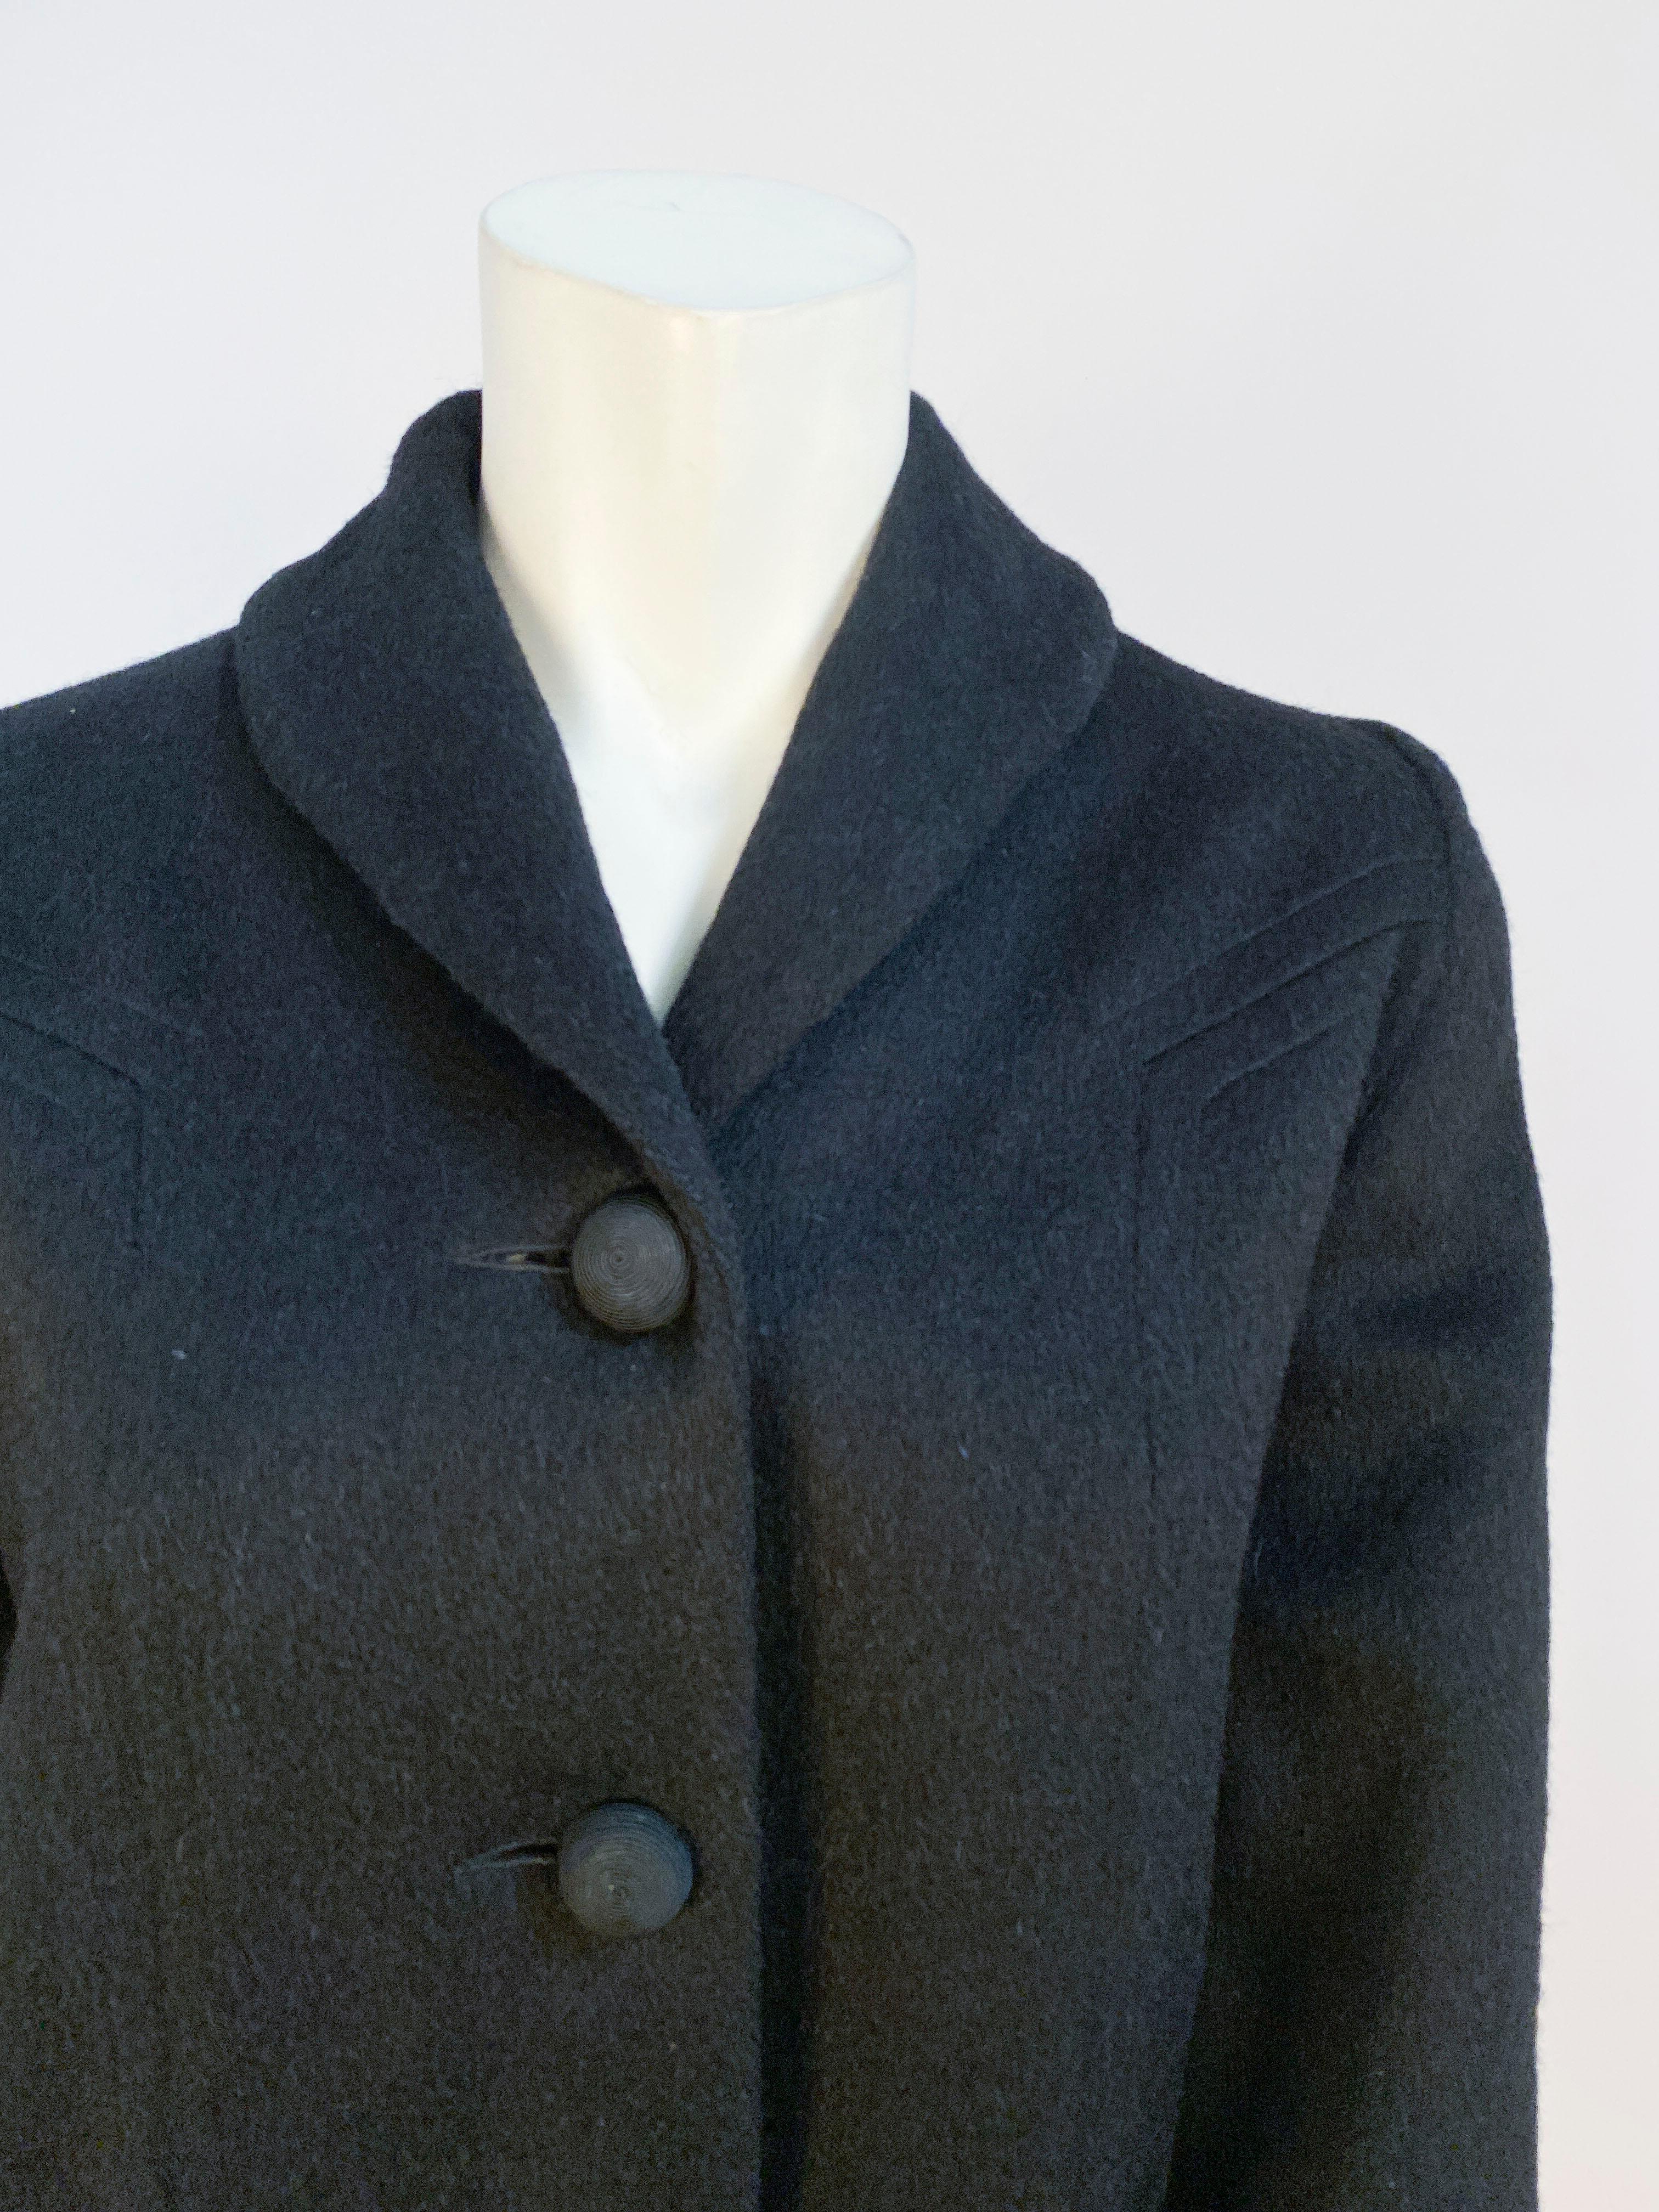 1950s Black wool jacket with full sleeves finished with rolled cuffs. The face of the jacket has in-set panels starting at the shoulder and coming down to the front smile pockets. 